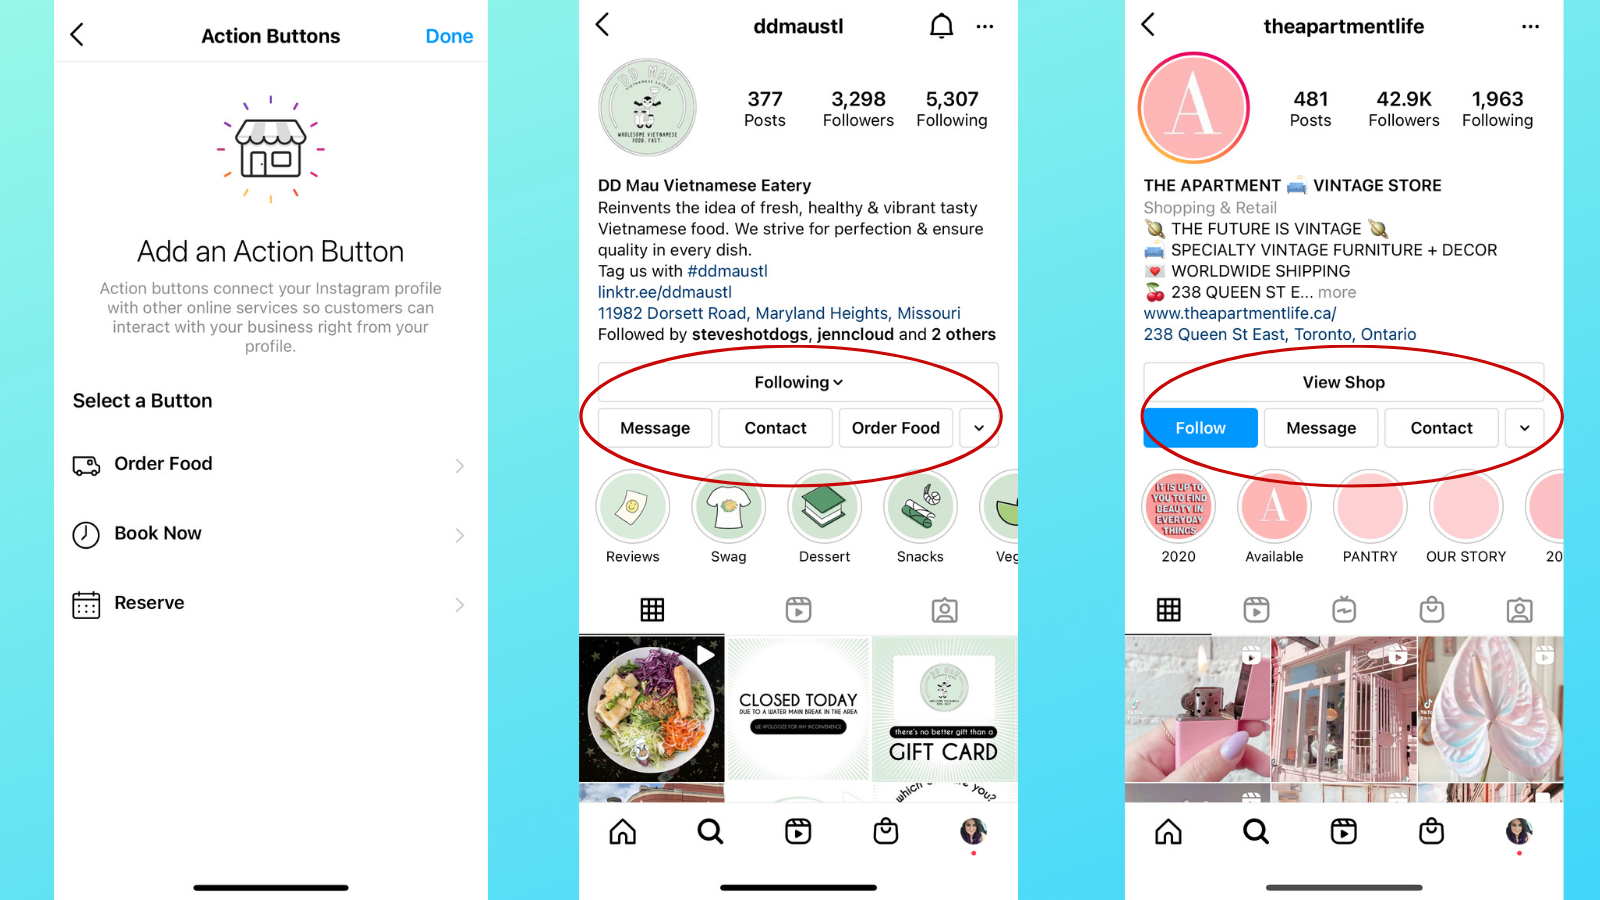 Instagram's 'Add an Action Button' offer options like 'Order Food' or 'View Shop'.